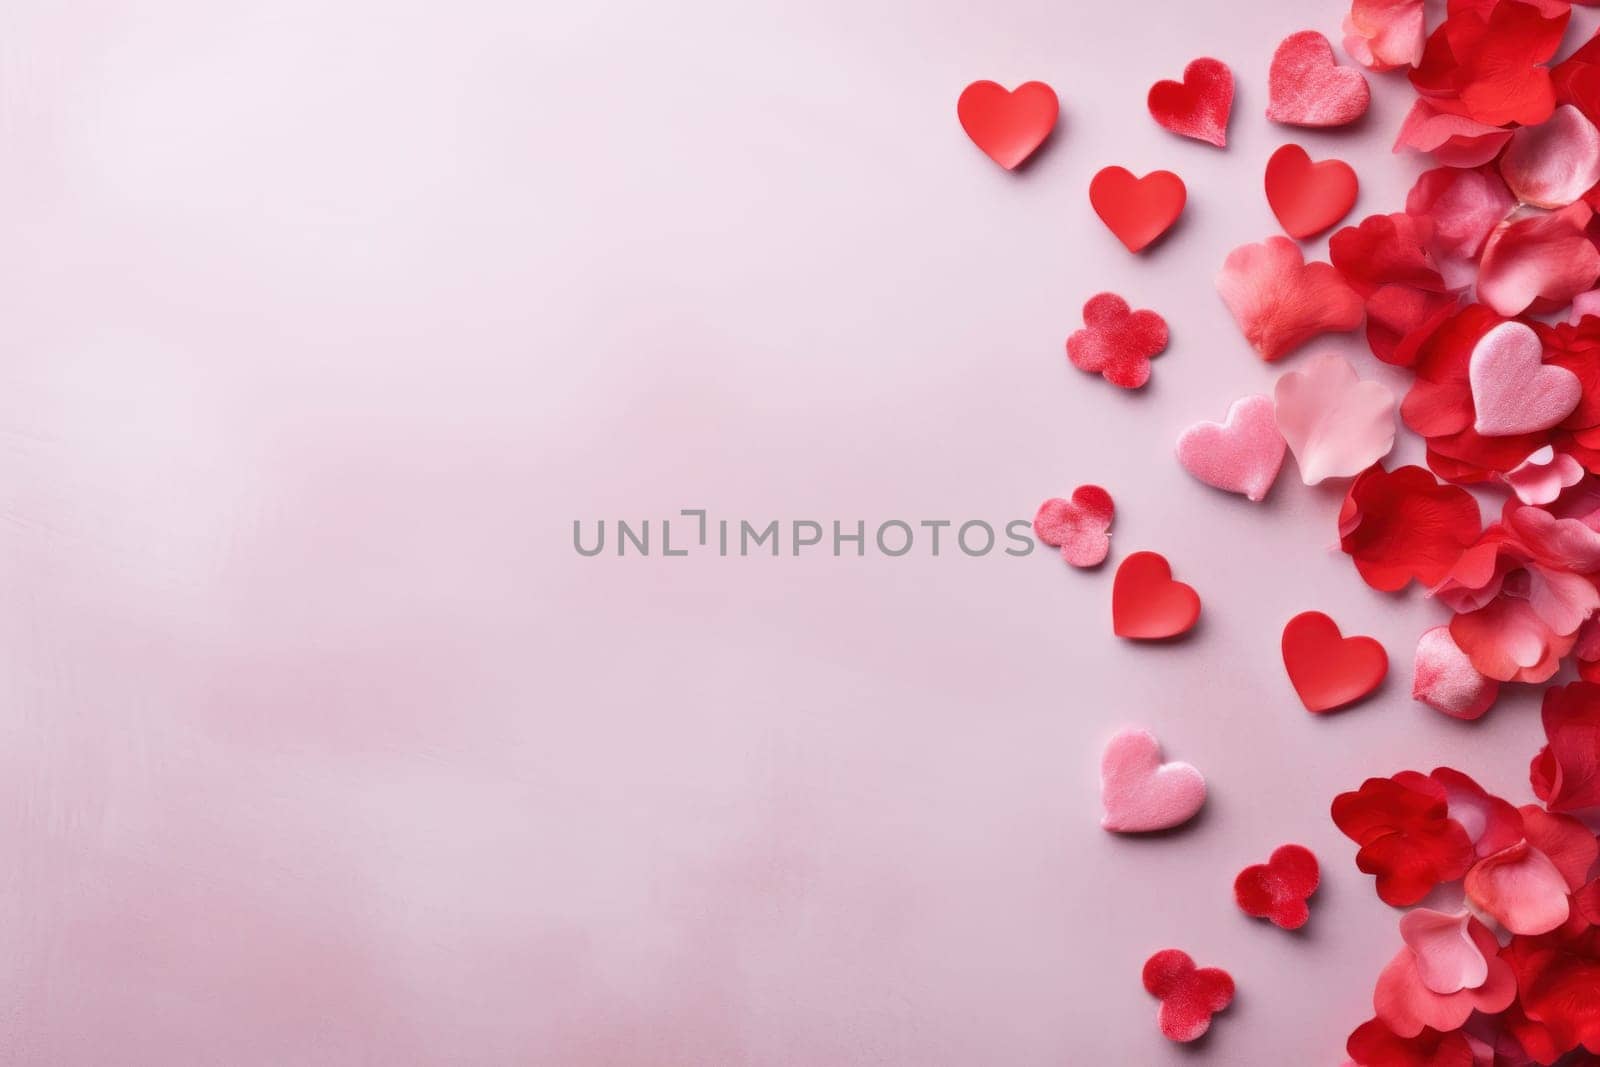 A festive pink background showered with flower petals. Romantic background by andreyz